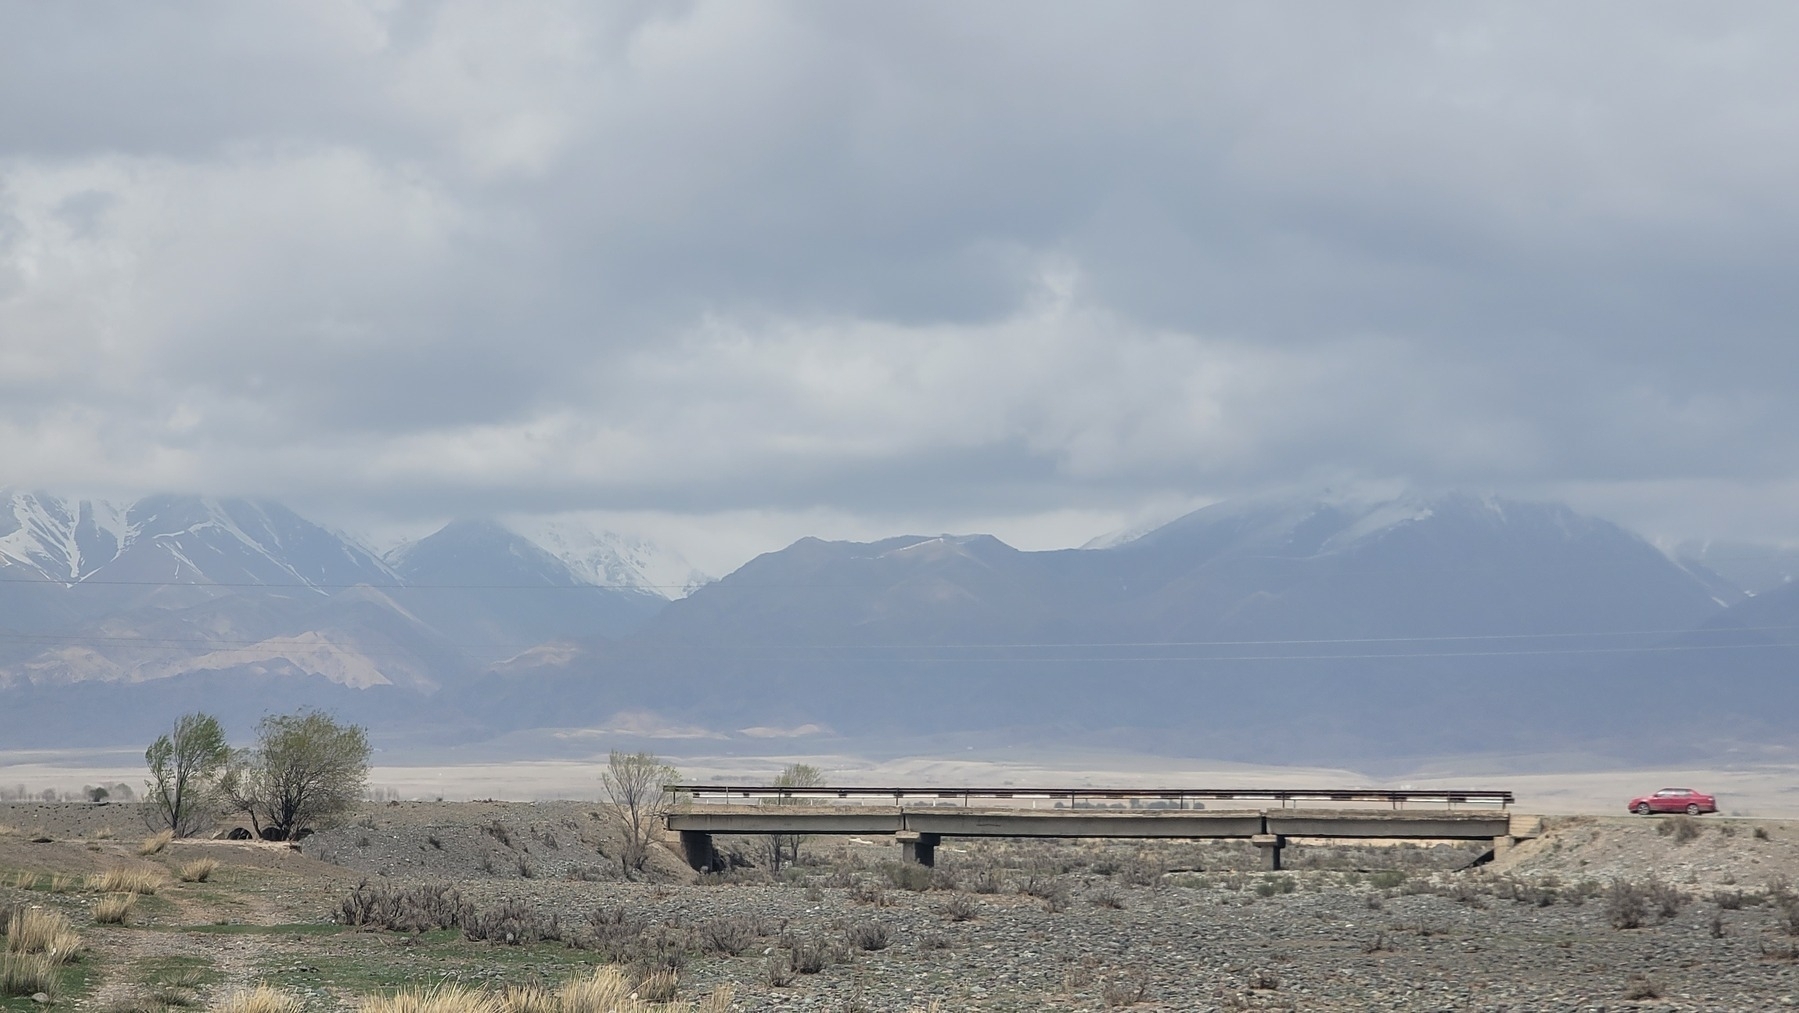 mountains in the background, bridge in the foreground over a dry riverbed. a red car parked to the right, off of but next to the bridge 